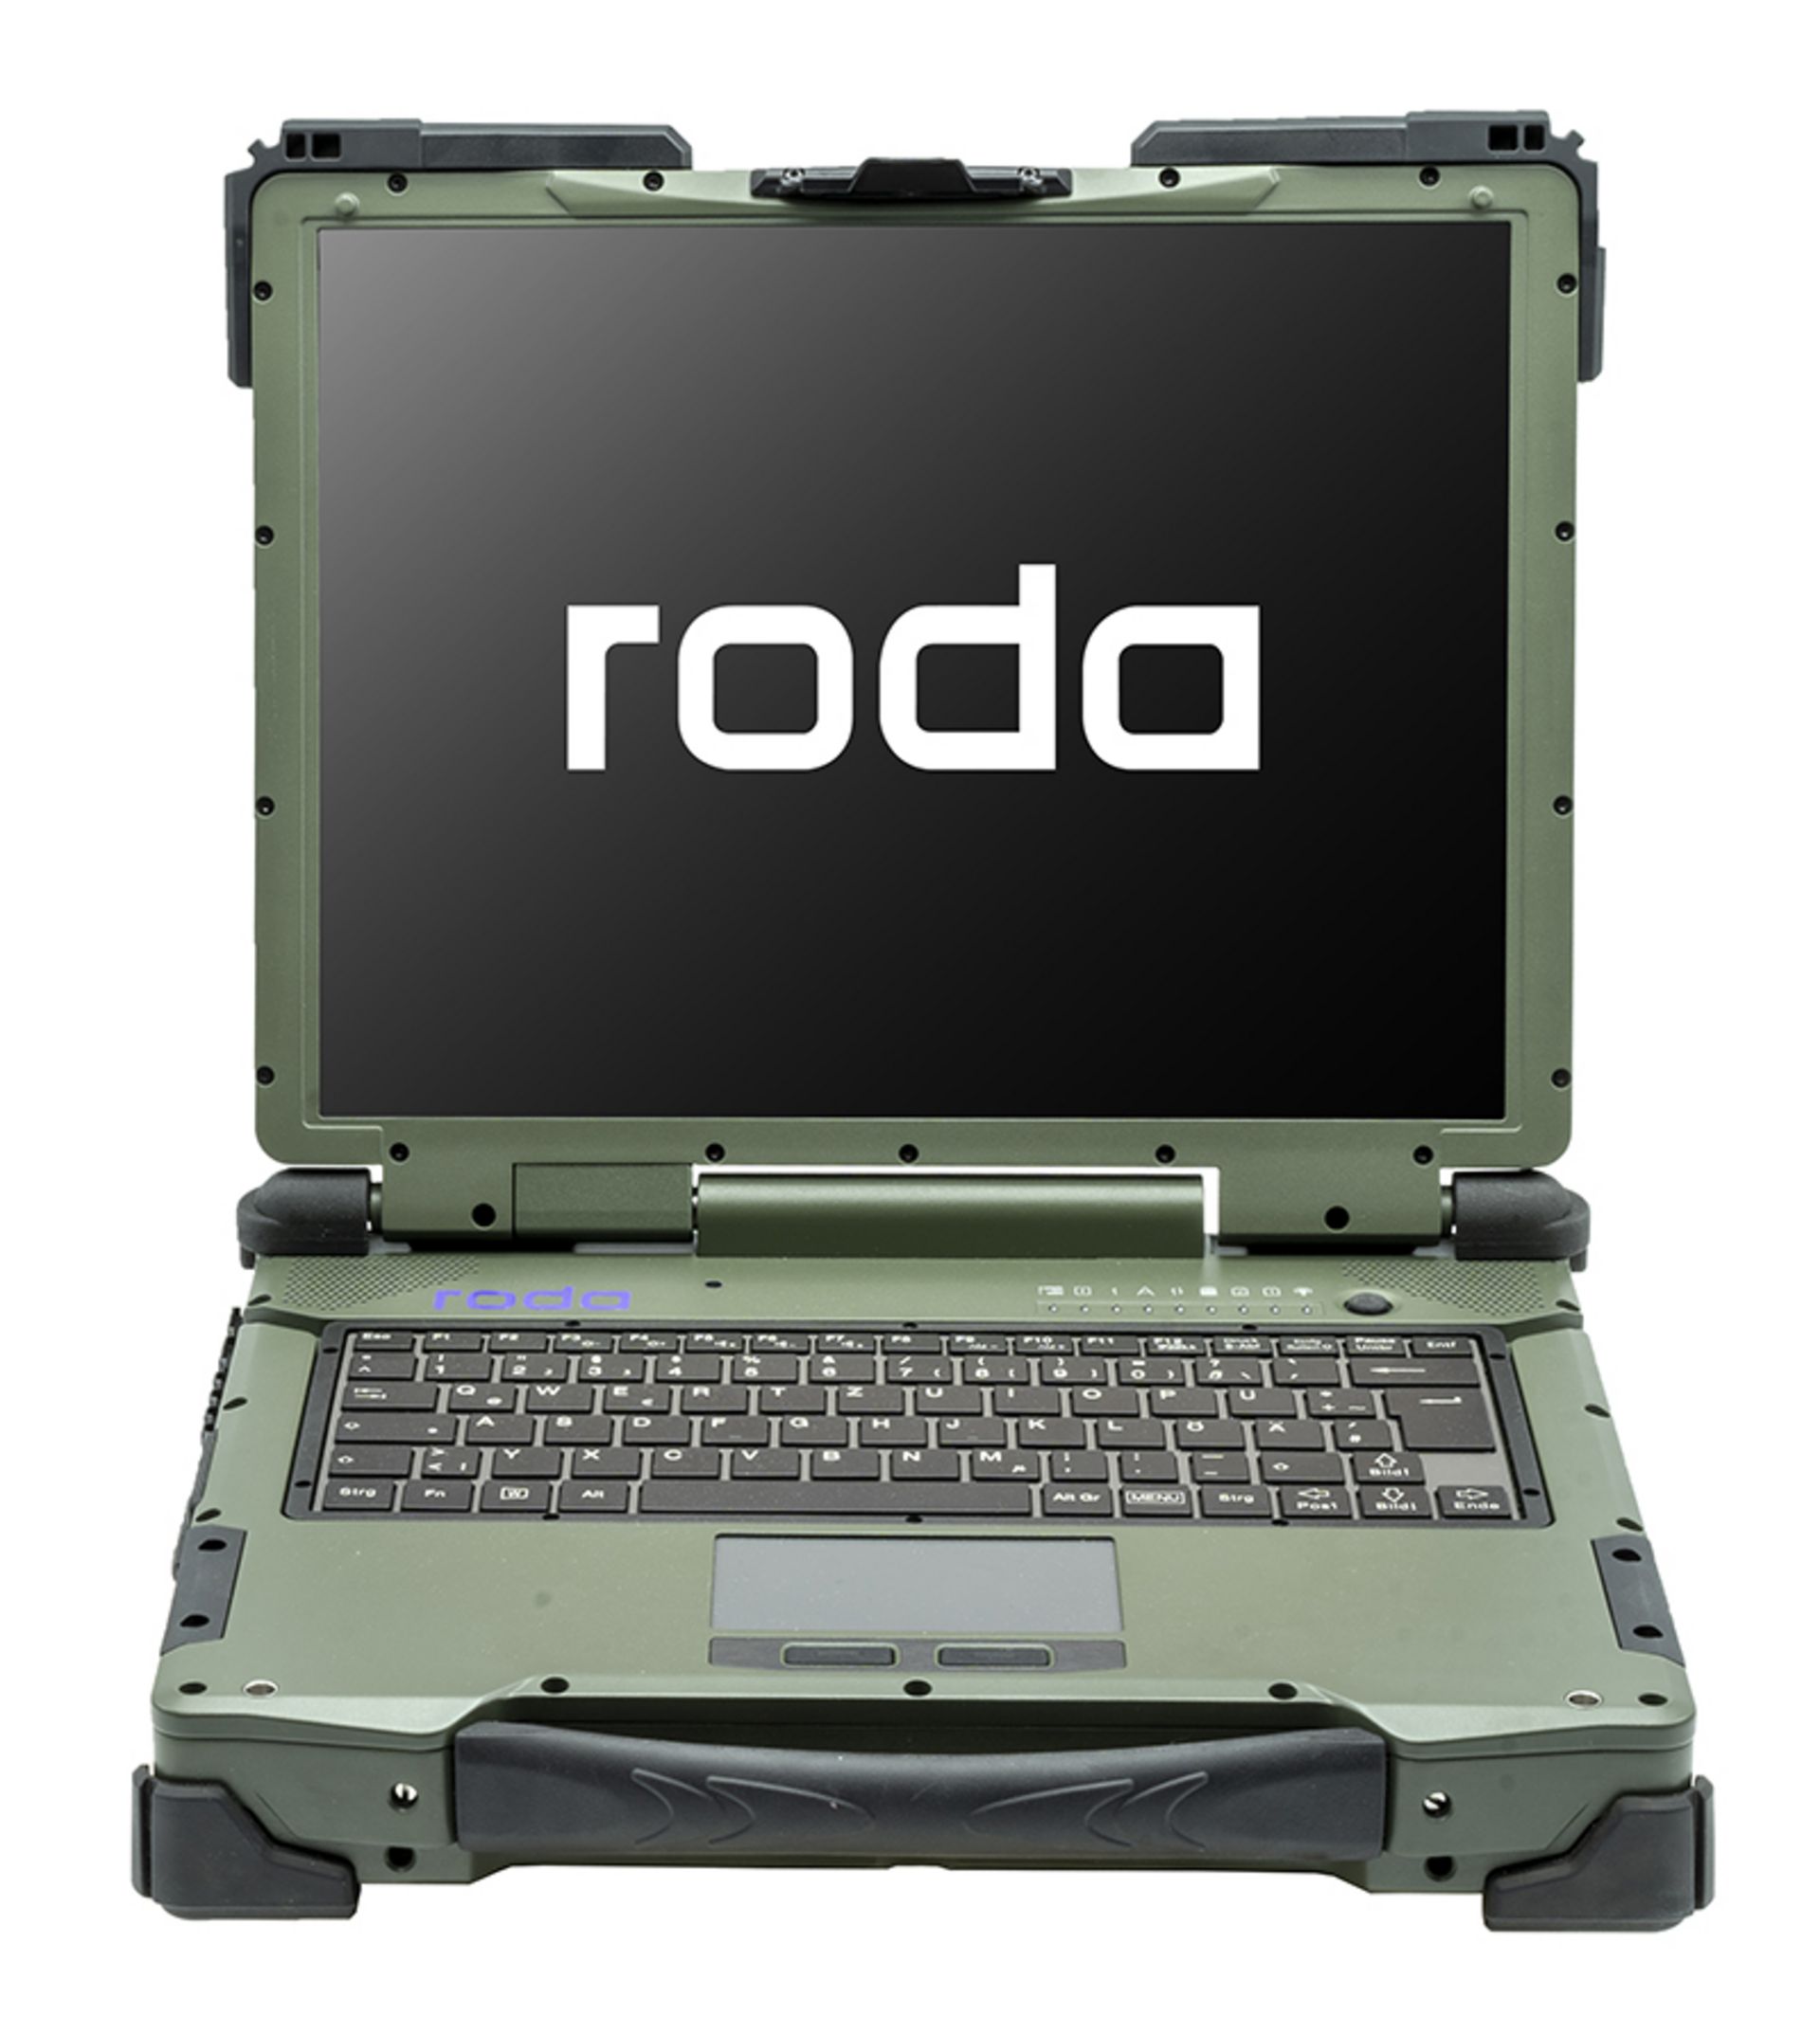 roda Rocky RK12 front view closed